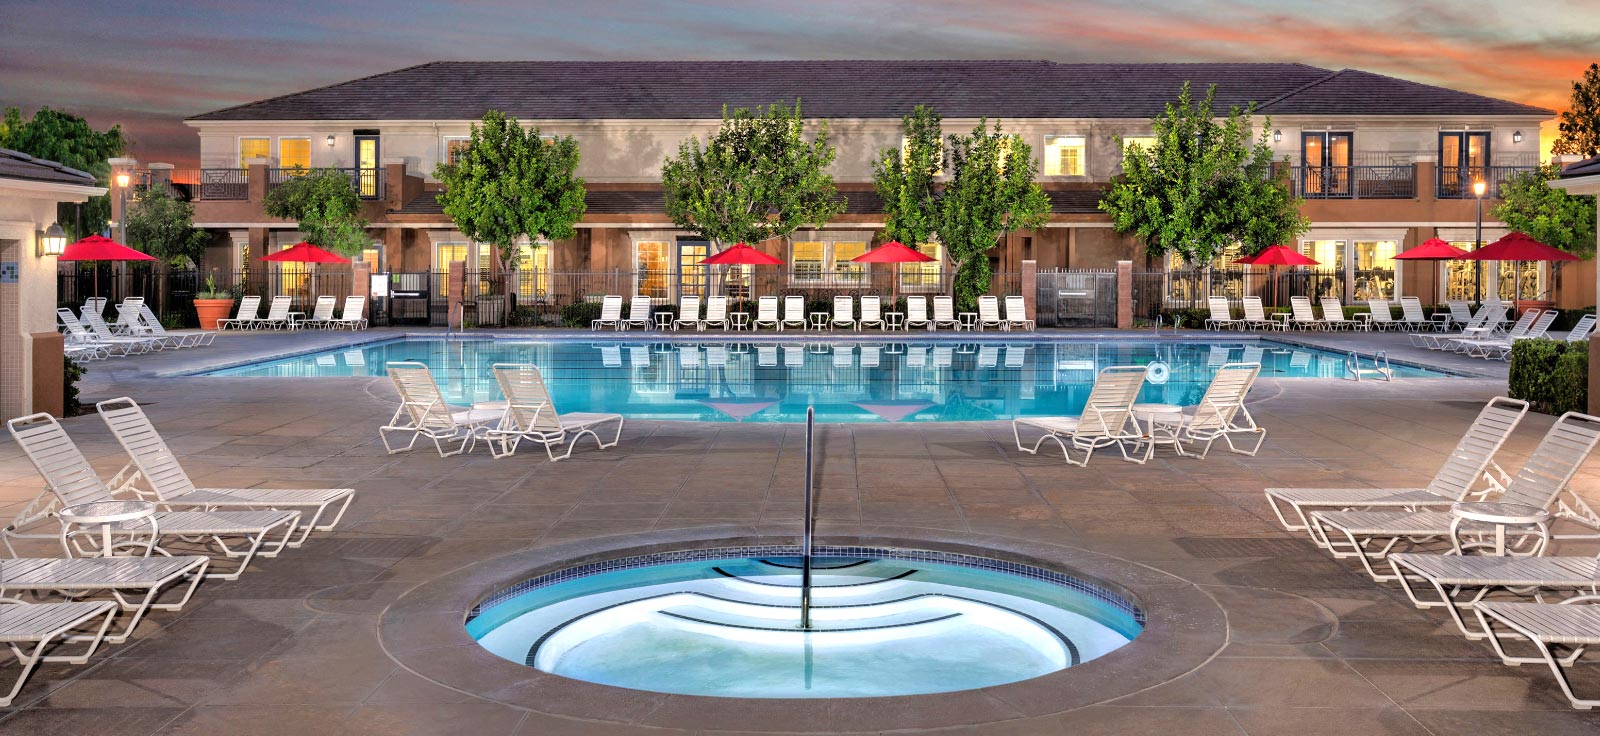 The Pool at The Parkhouse at The Preserve at Chino